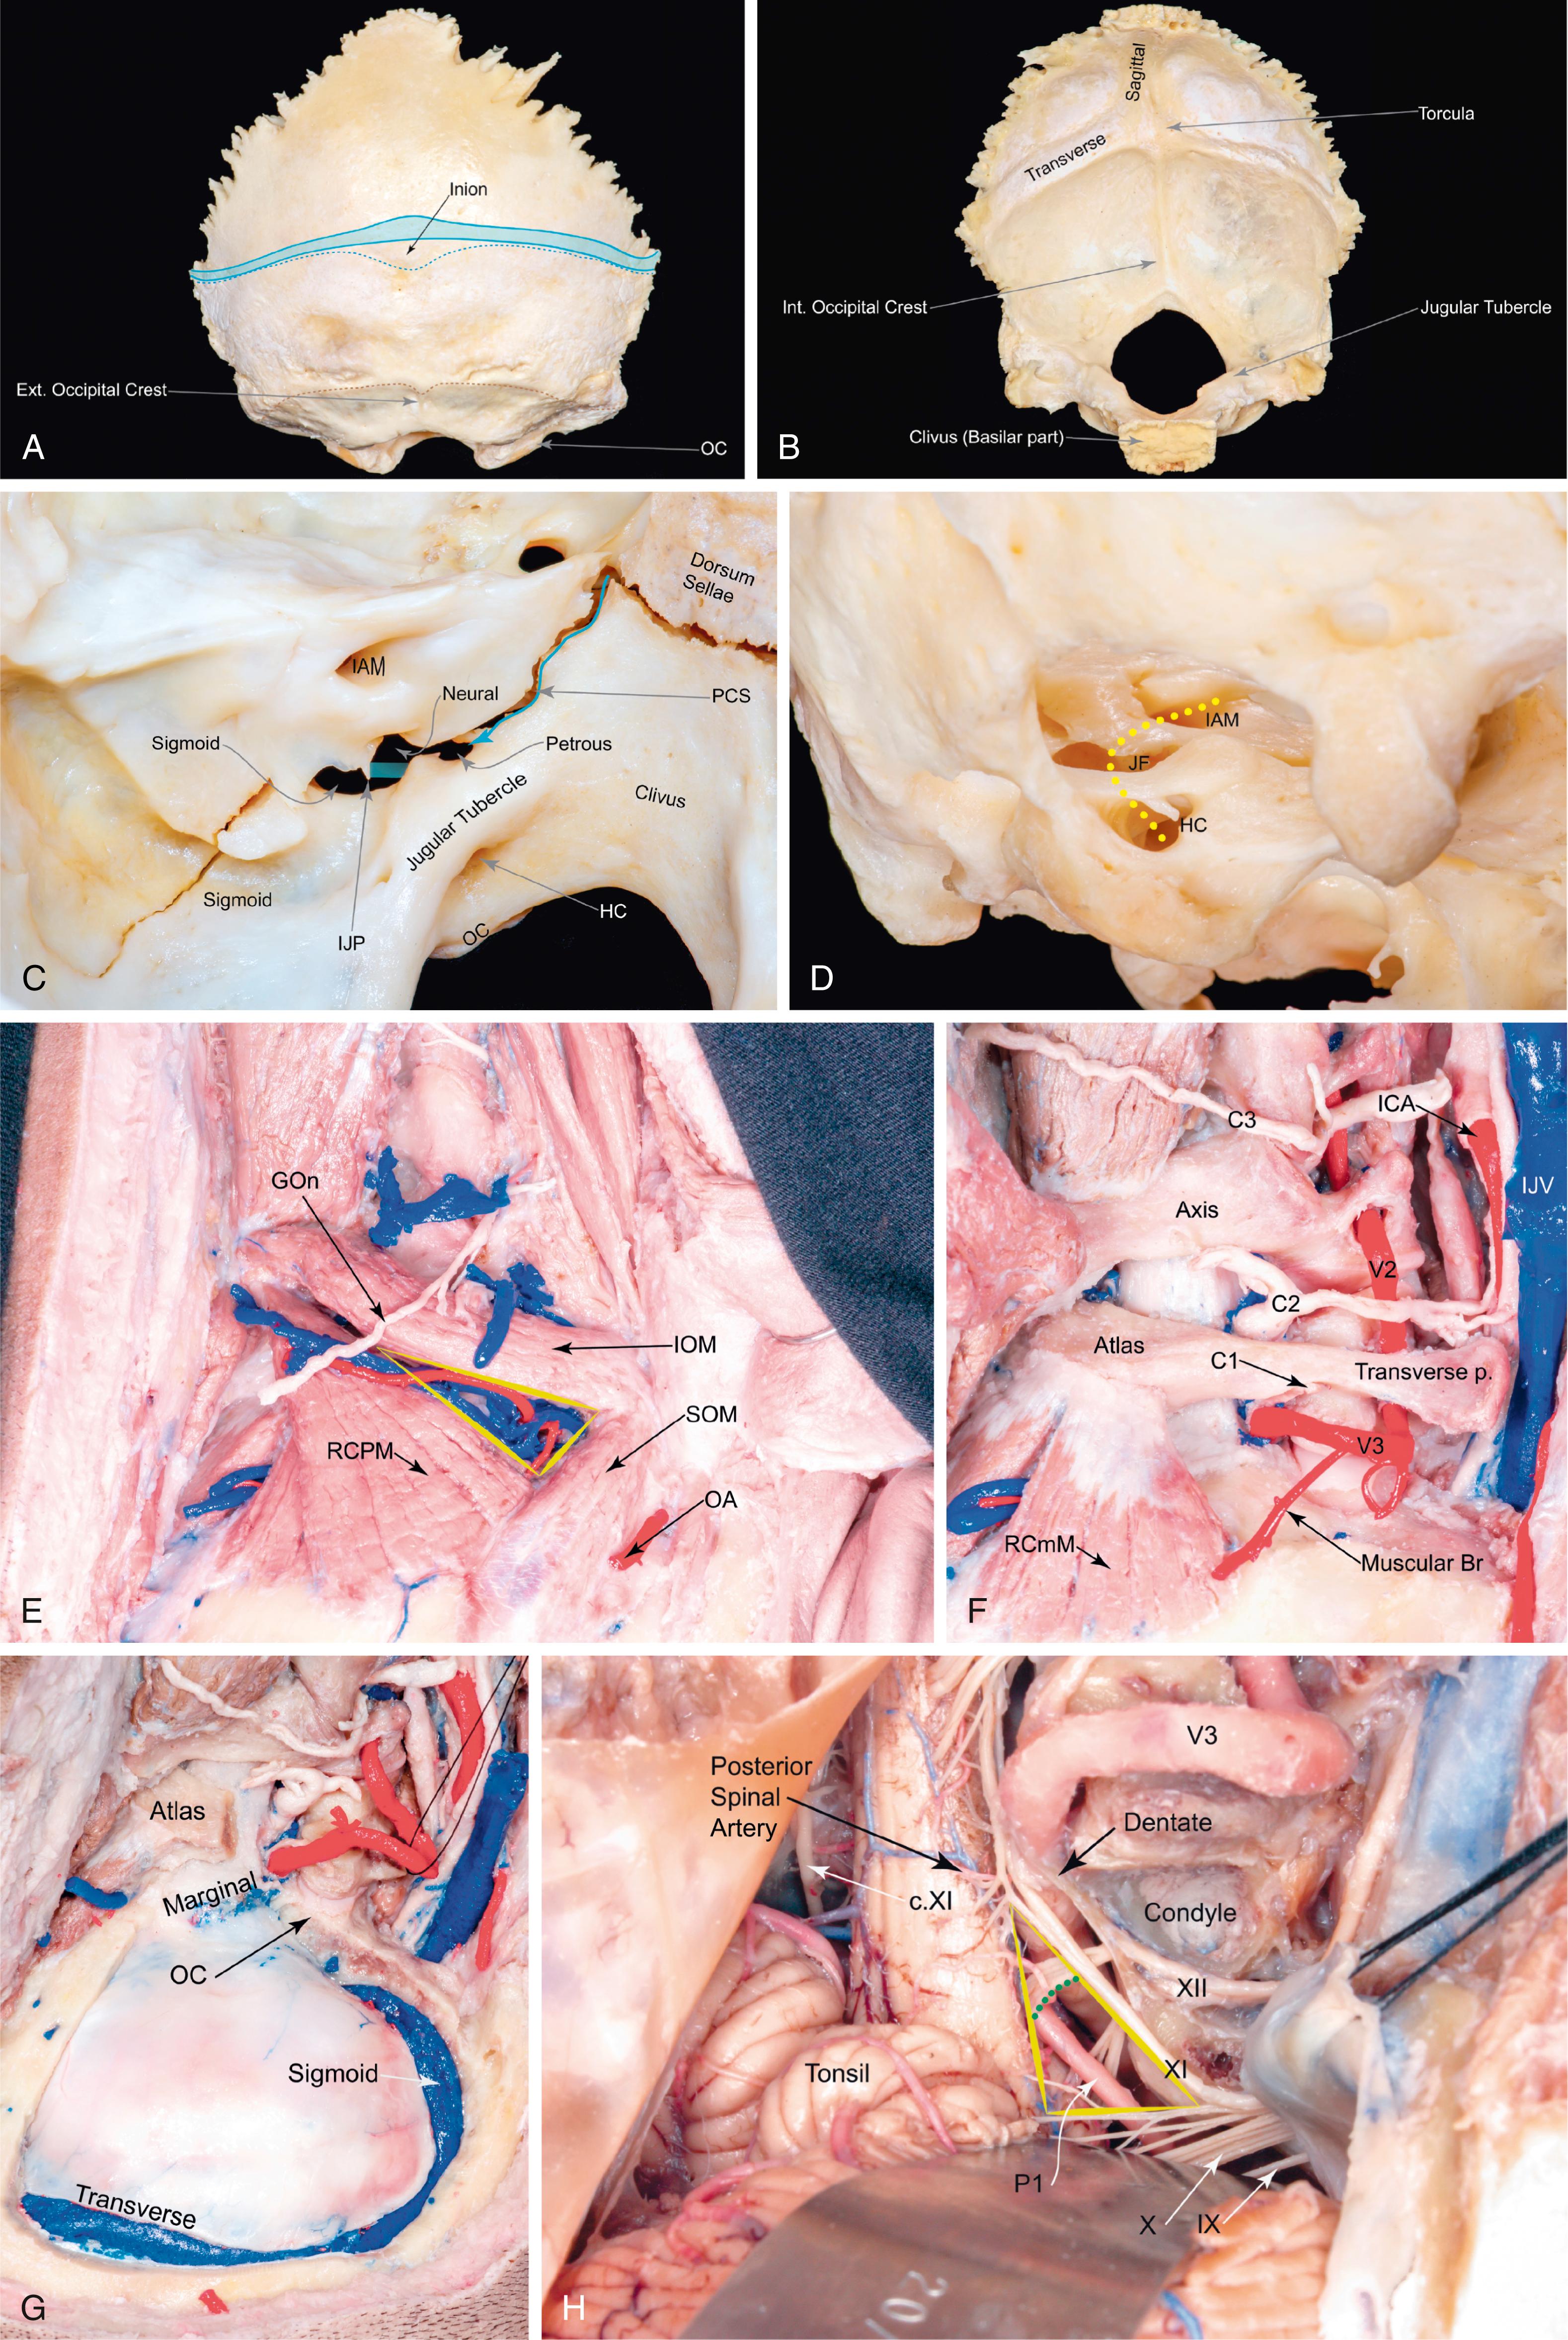 Figure 3.1, Bone anatomy and surgical landmarks relevant to the far lateral approach.